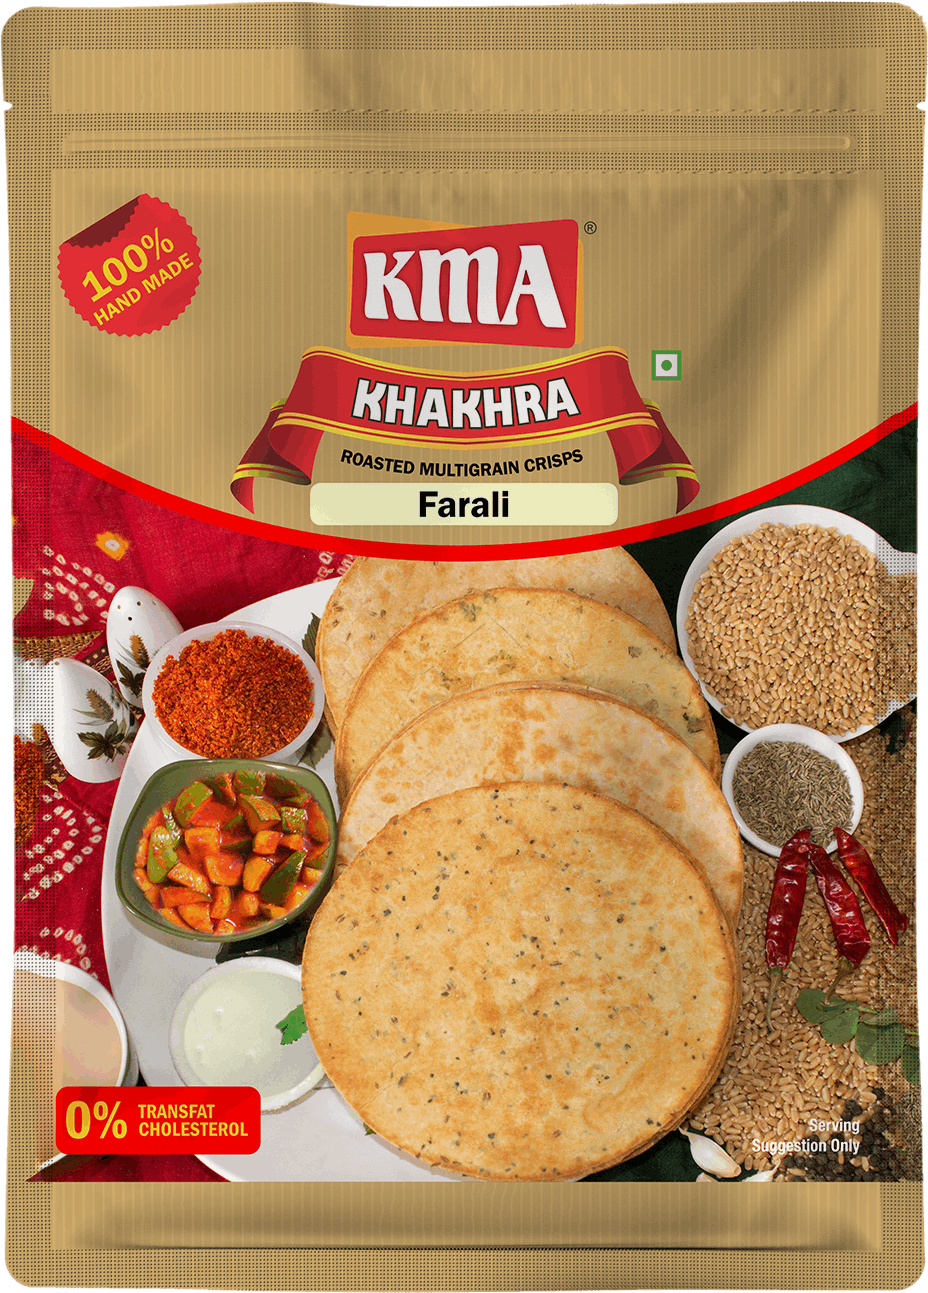 Don't miss out on this delightful and nutritious snack. Add KMA KMA Farali Khakhra to your cart today and make your fasting days more enjoyable. KMA Farali Khakhra | Falahari Snacks | 4 Packs Combo | 200g Each | Specially made for Vrat, Upwas, Fast